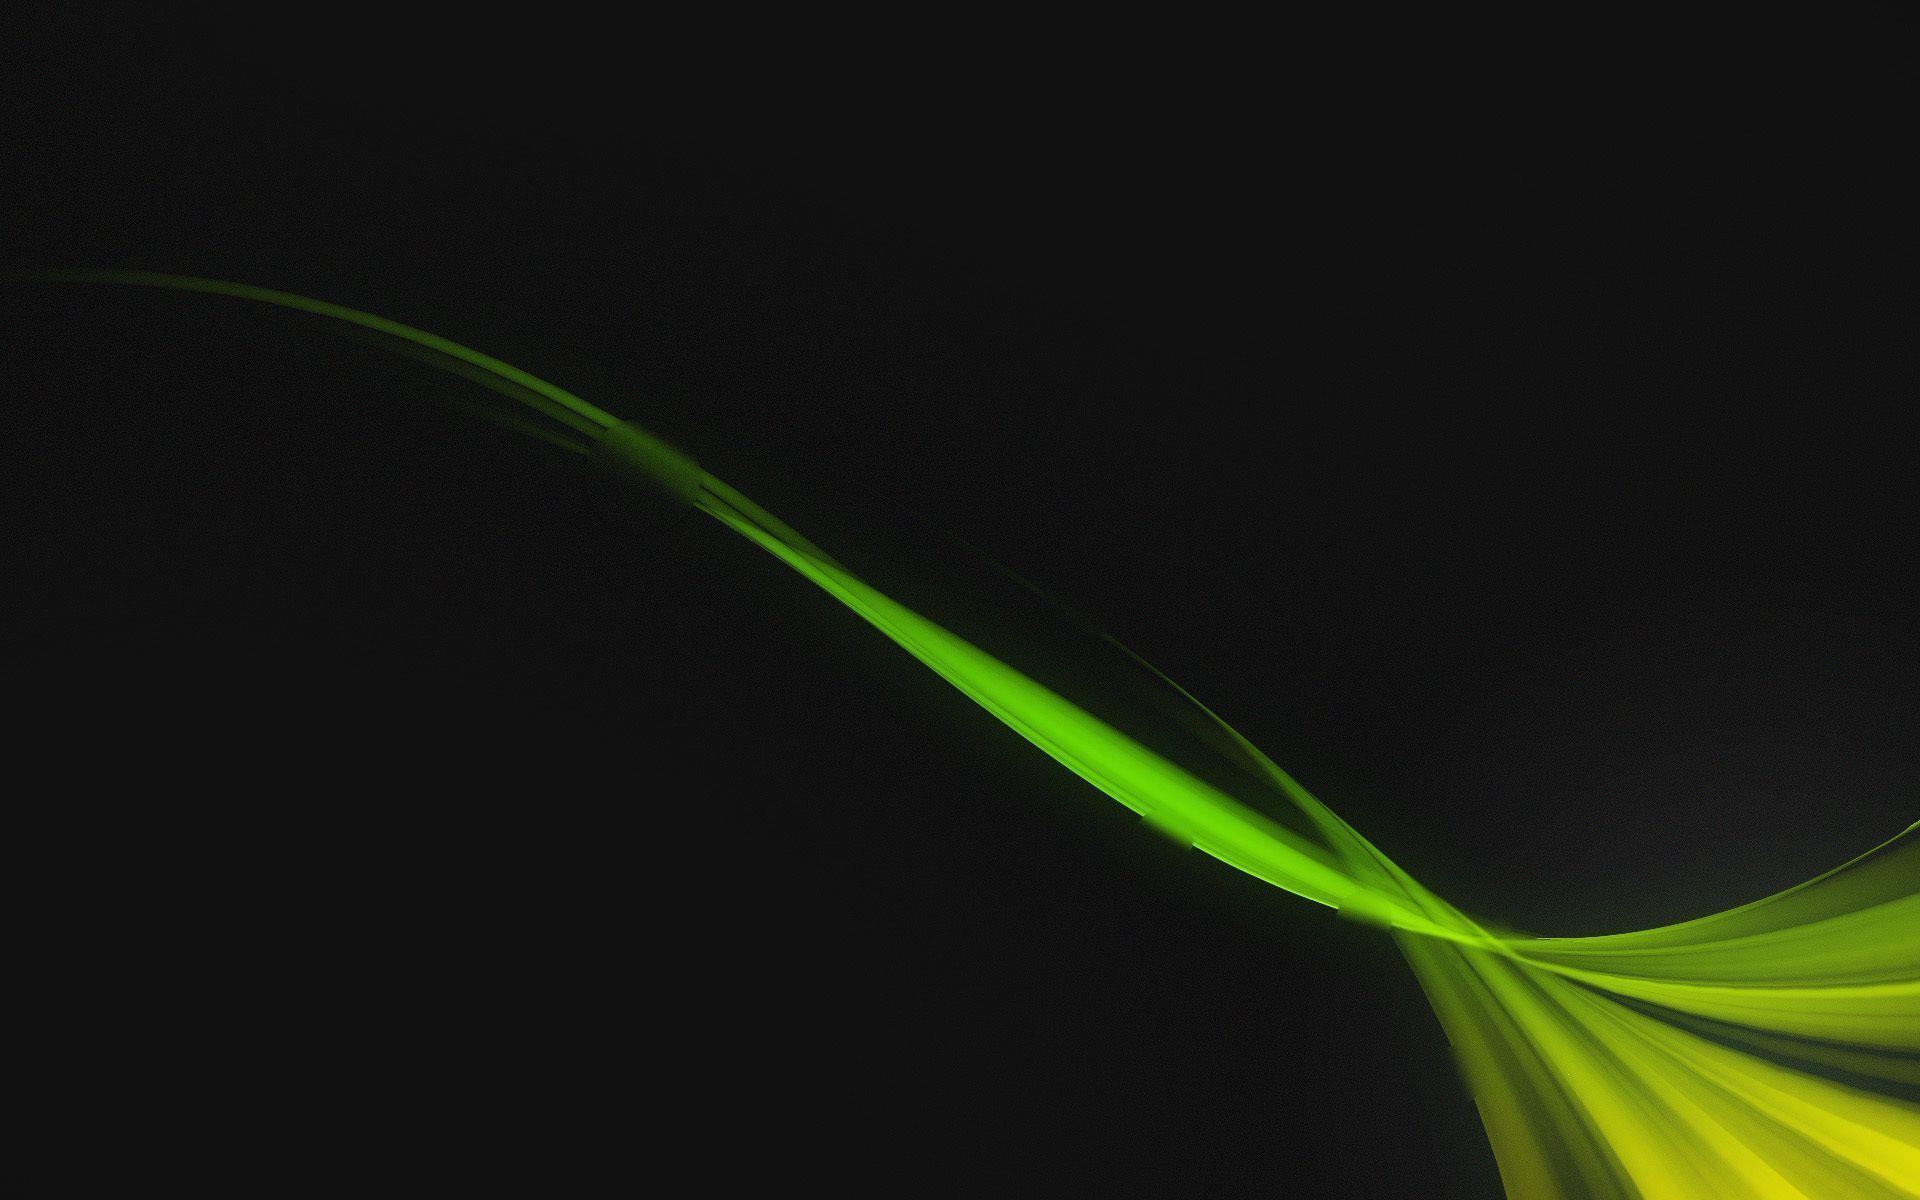 Wallpaper For > Green And Black Wallpaper